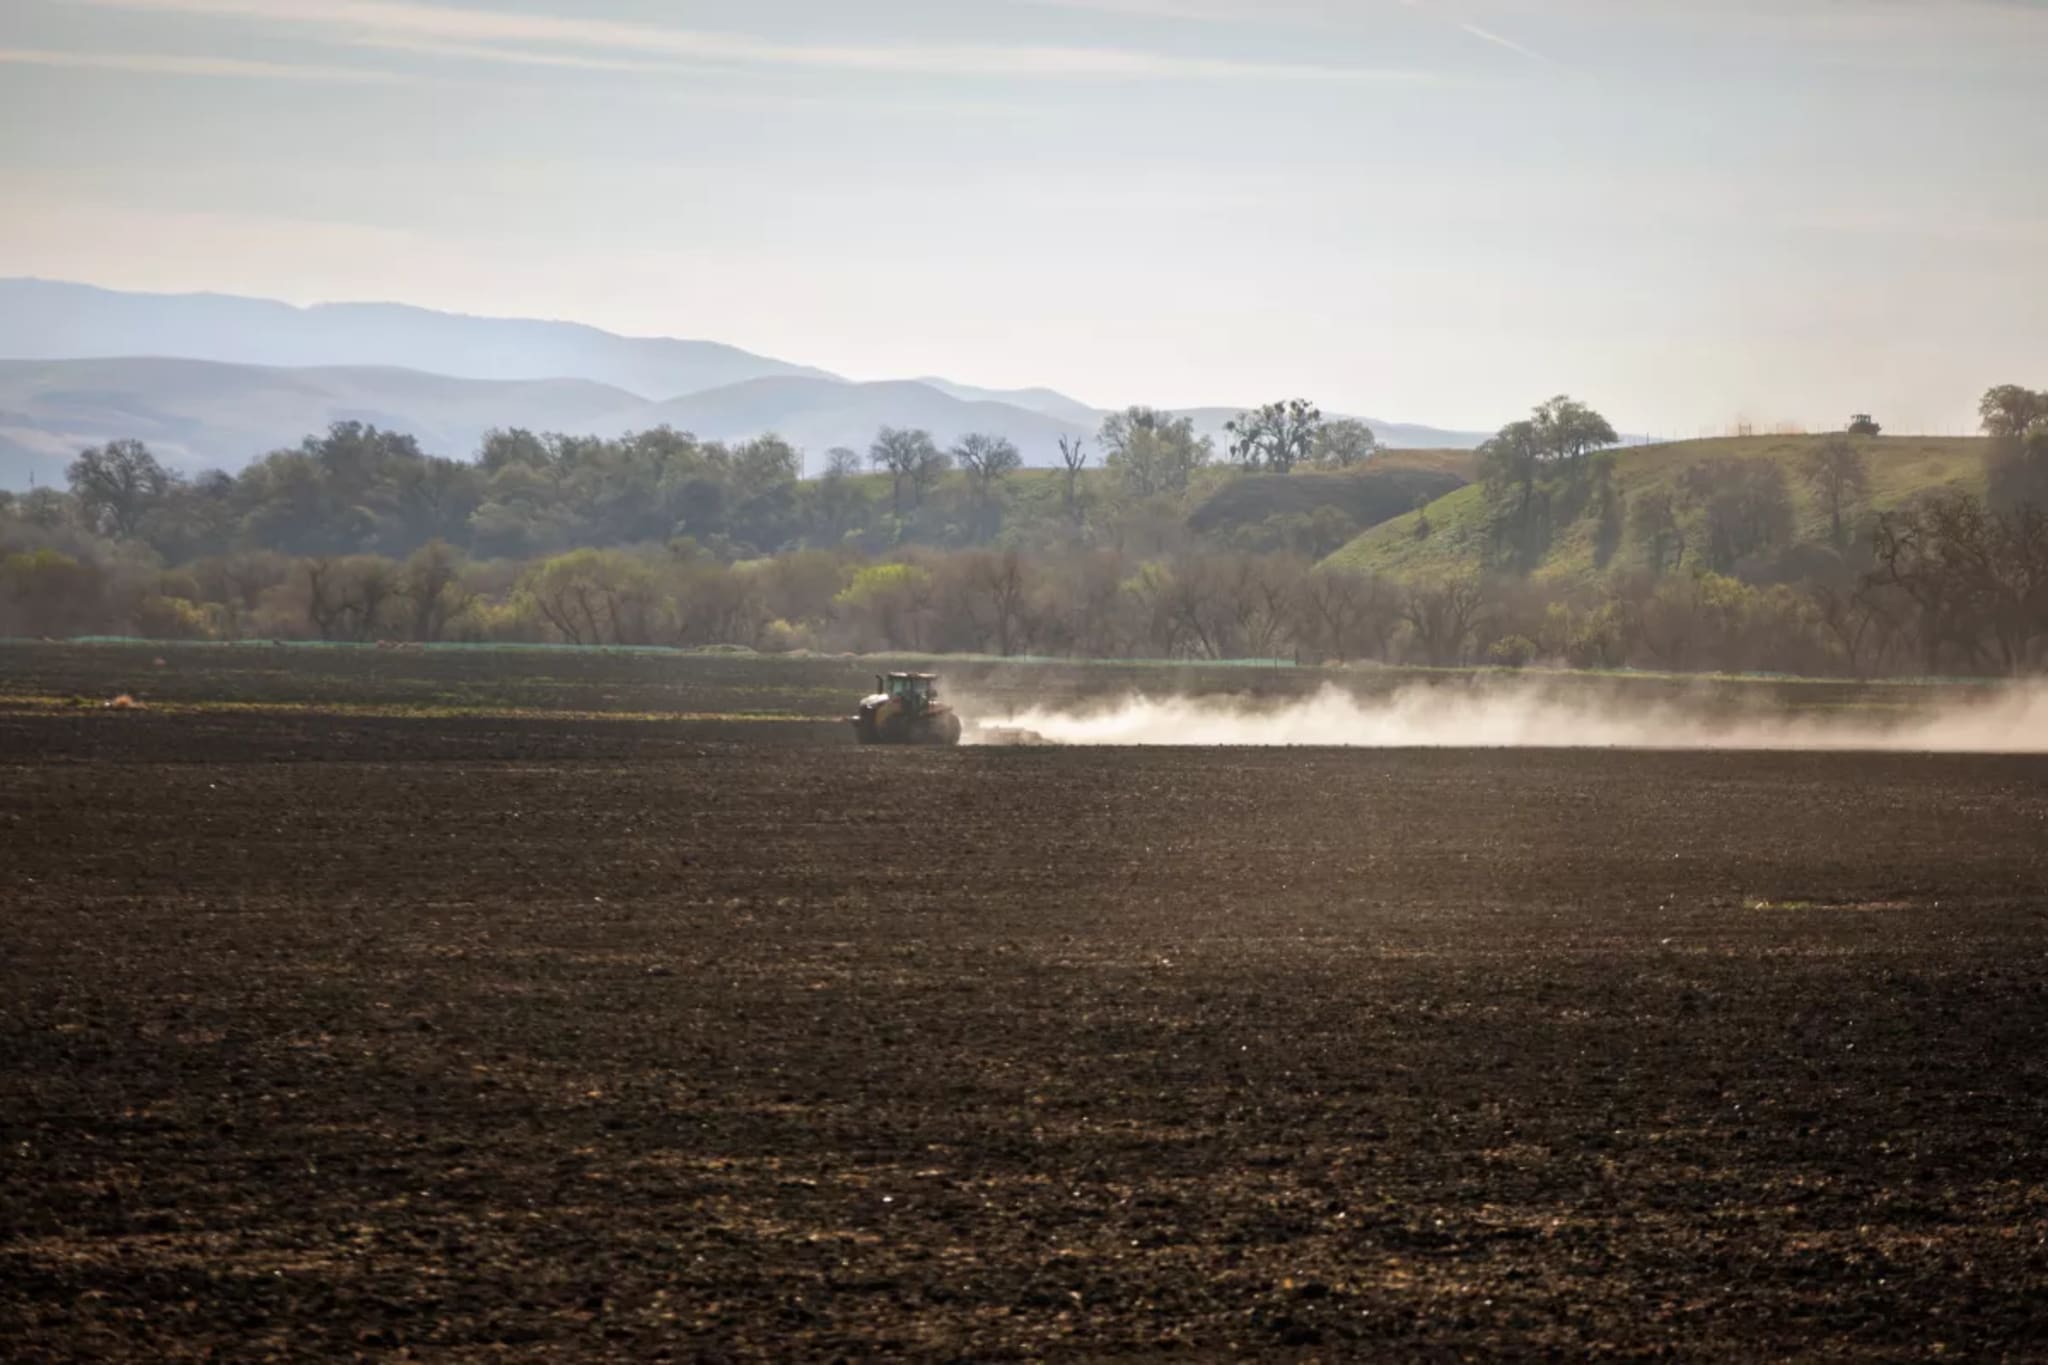 A tractor plows a field in Paso Robles. Cases of valley fever, caused by breathing in dust that contains a fungus, are highest in the Central Coast and Central Valley regions of California. (Jason Armond / Los Angeles Times)